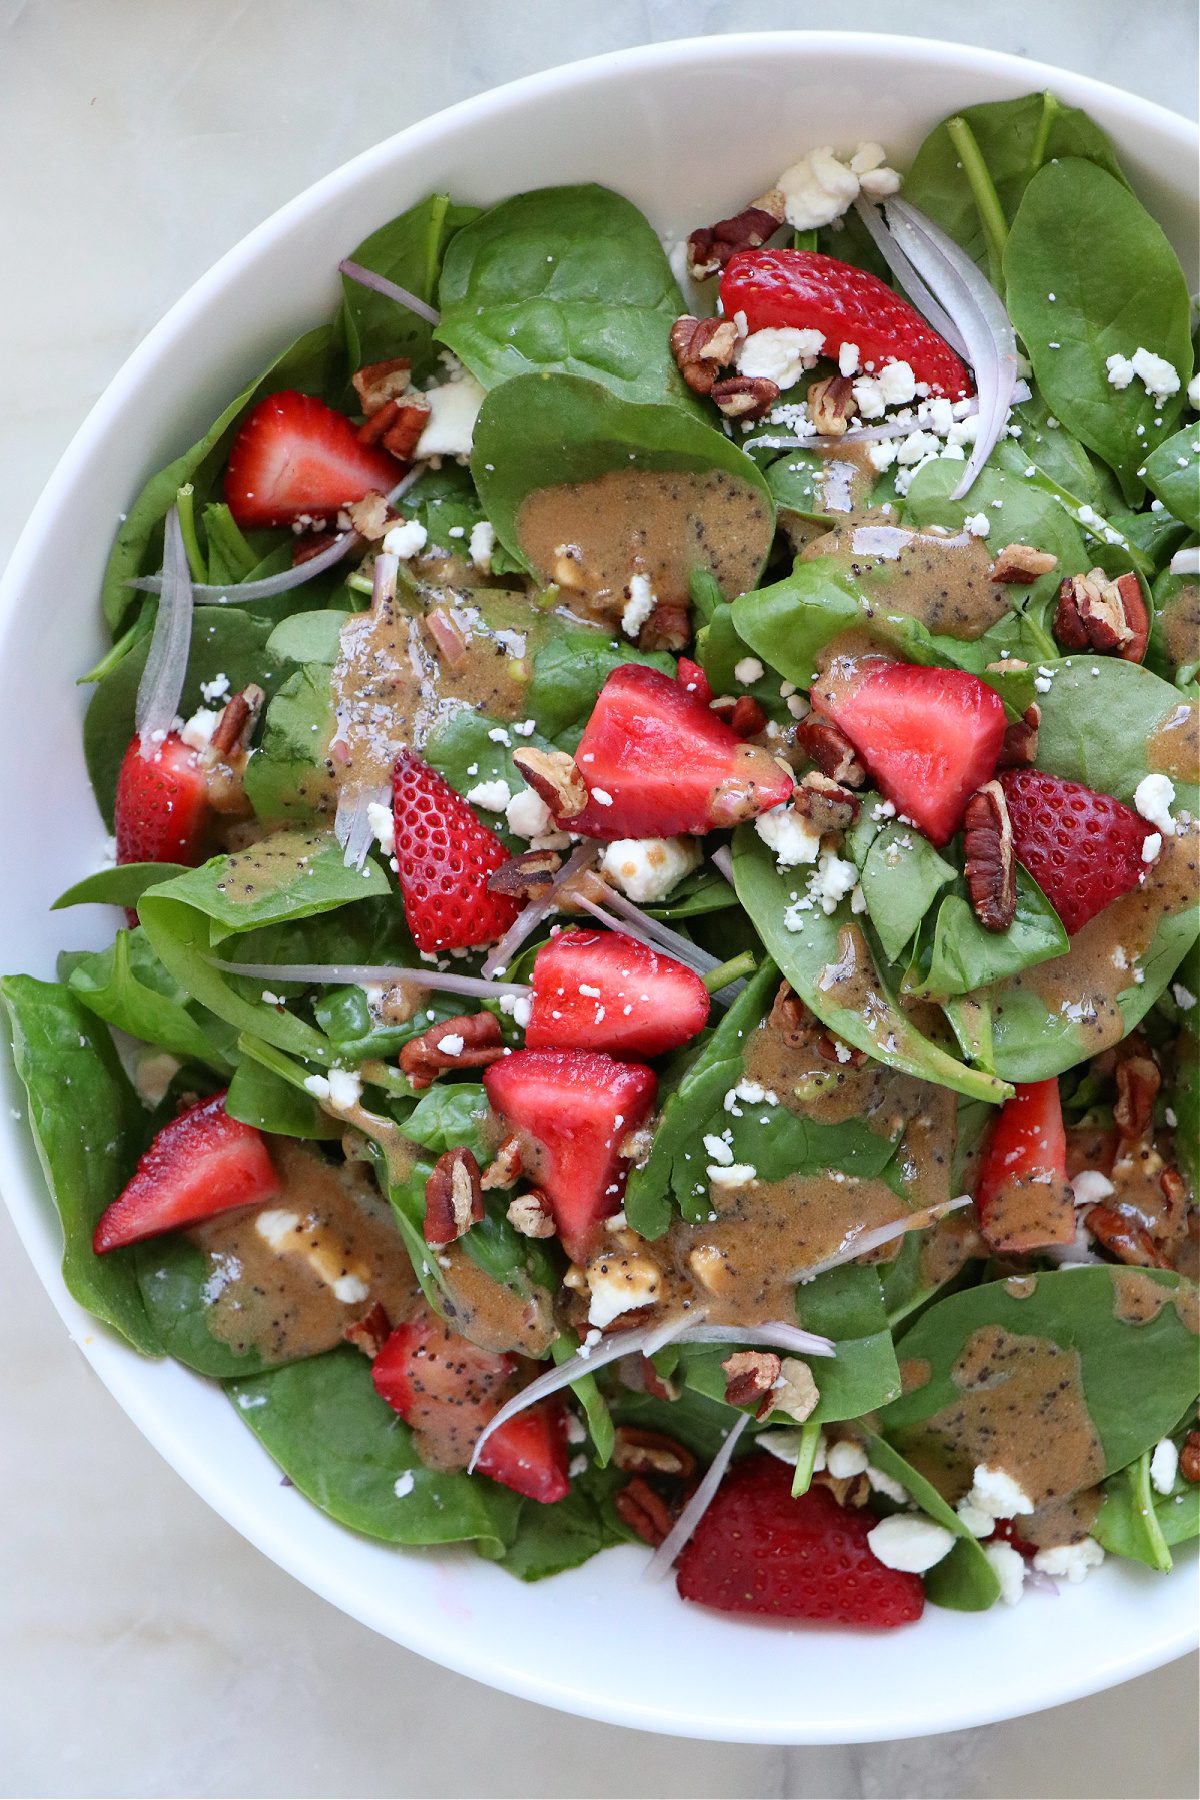 Strawberry Spinach Salad with Poppyseed Dressing